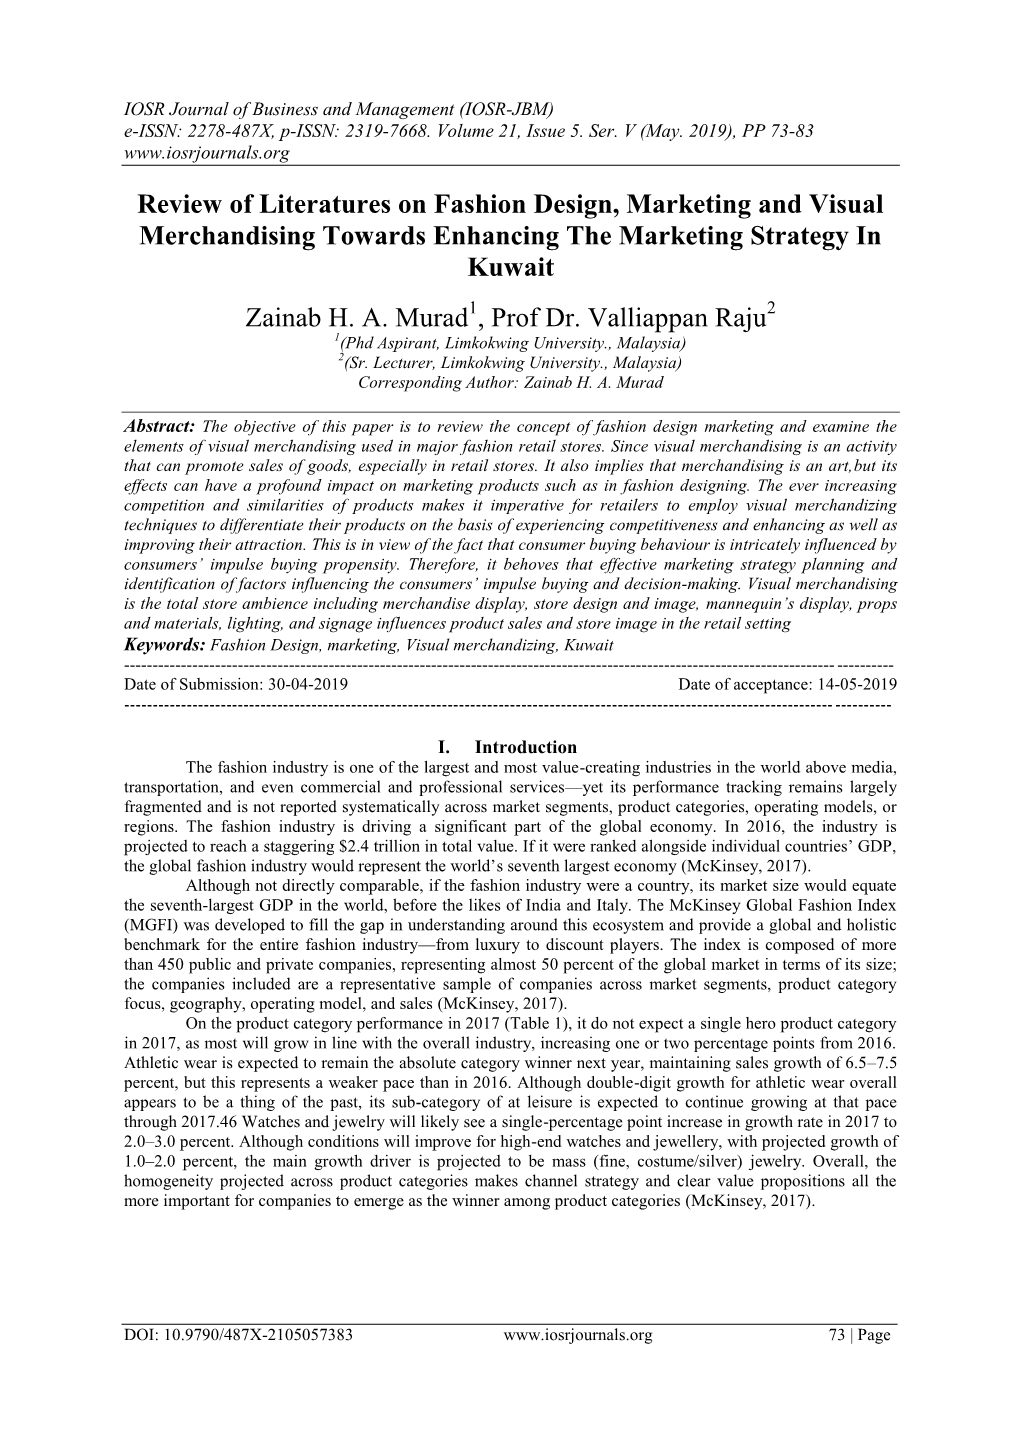 Review of Literatures on Fashion Design, Marketing and Visual Merchandising Towards Enhancing the Marketing Strategy in Kuwait